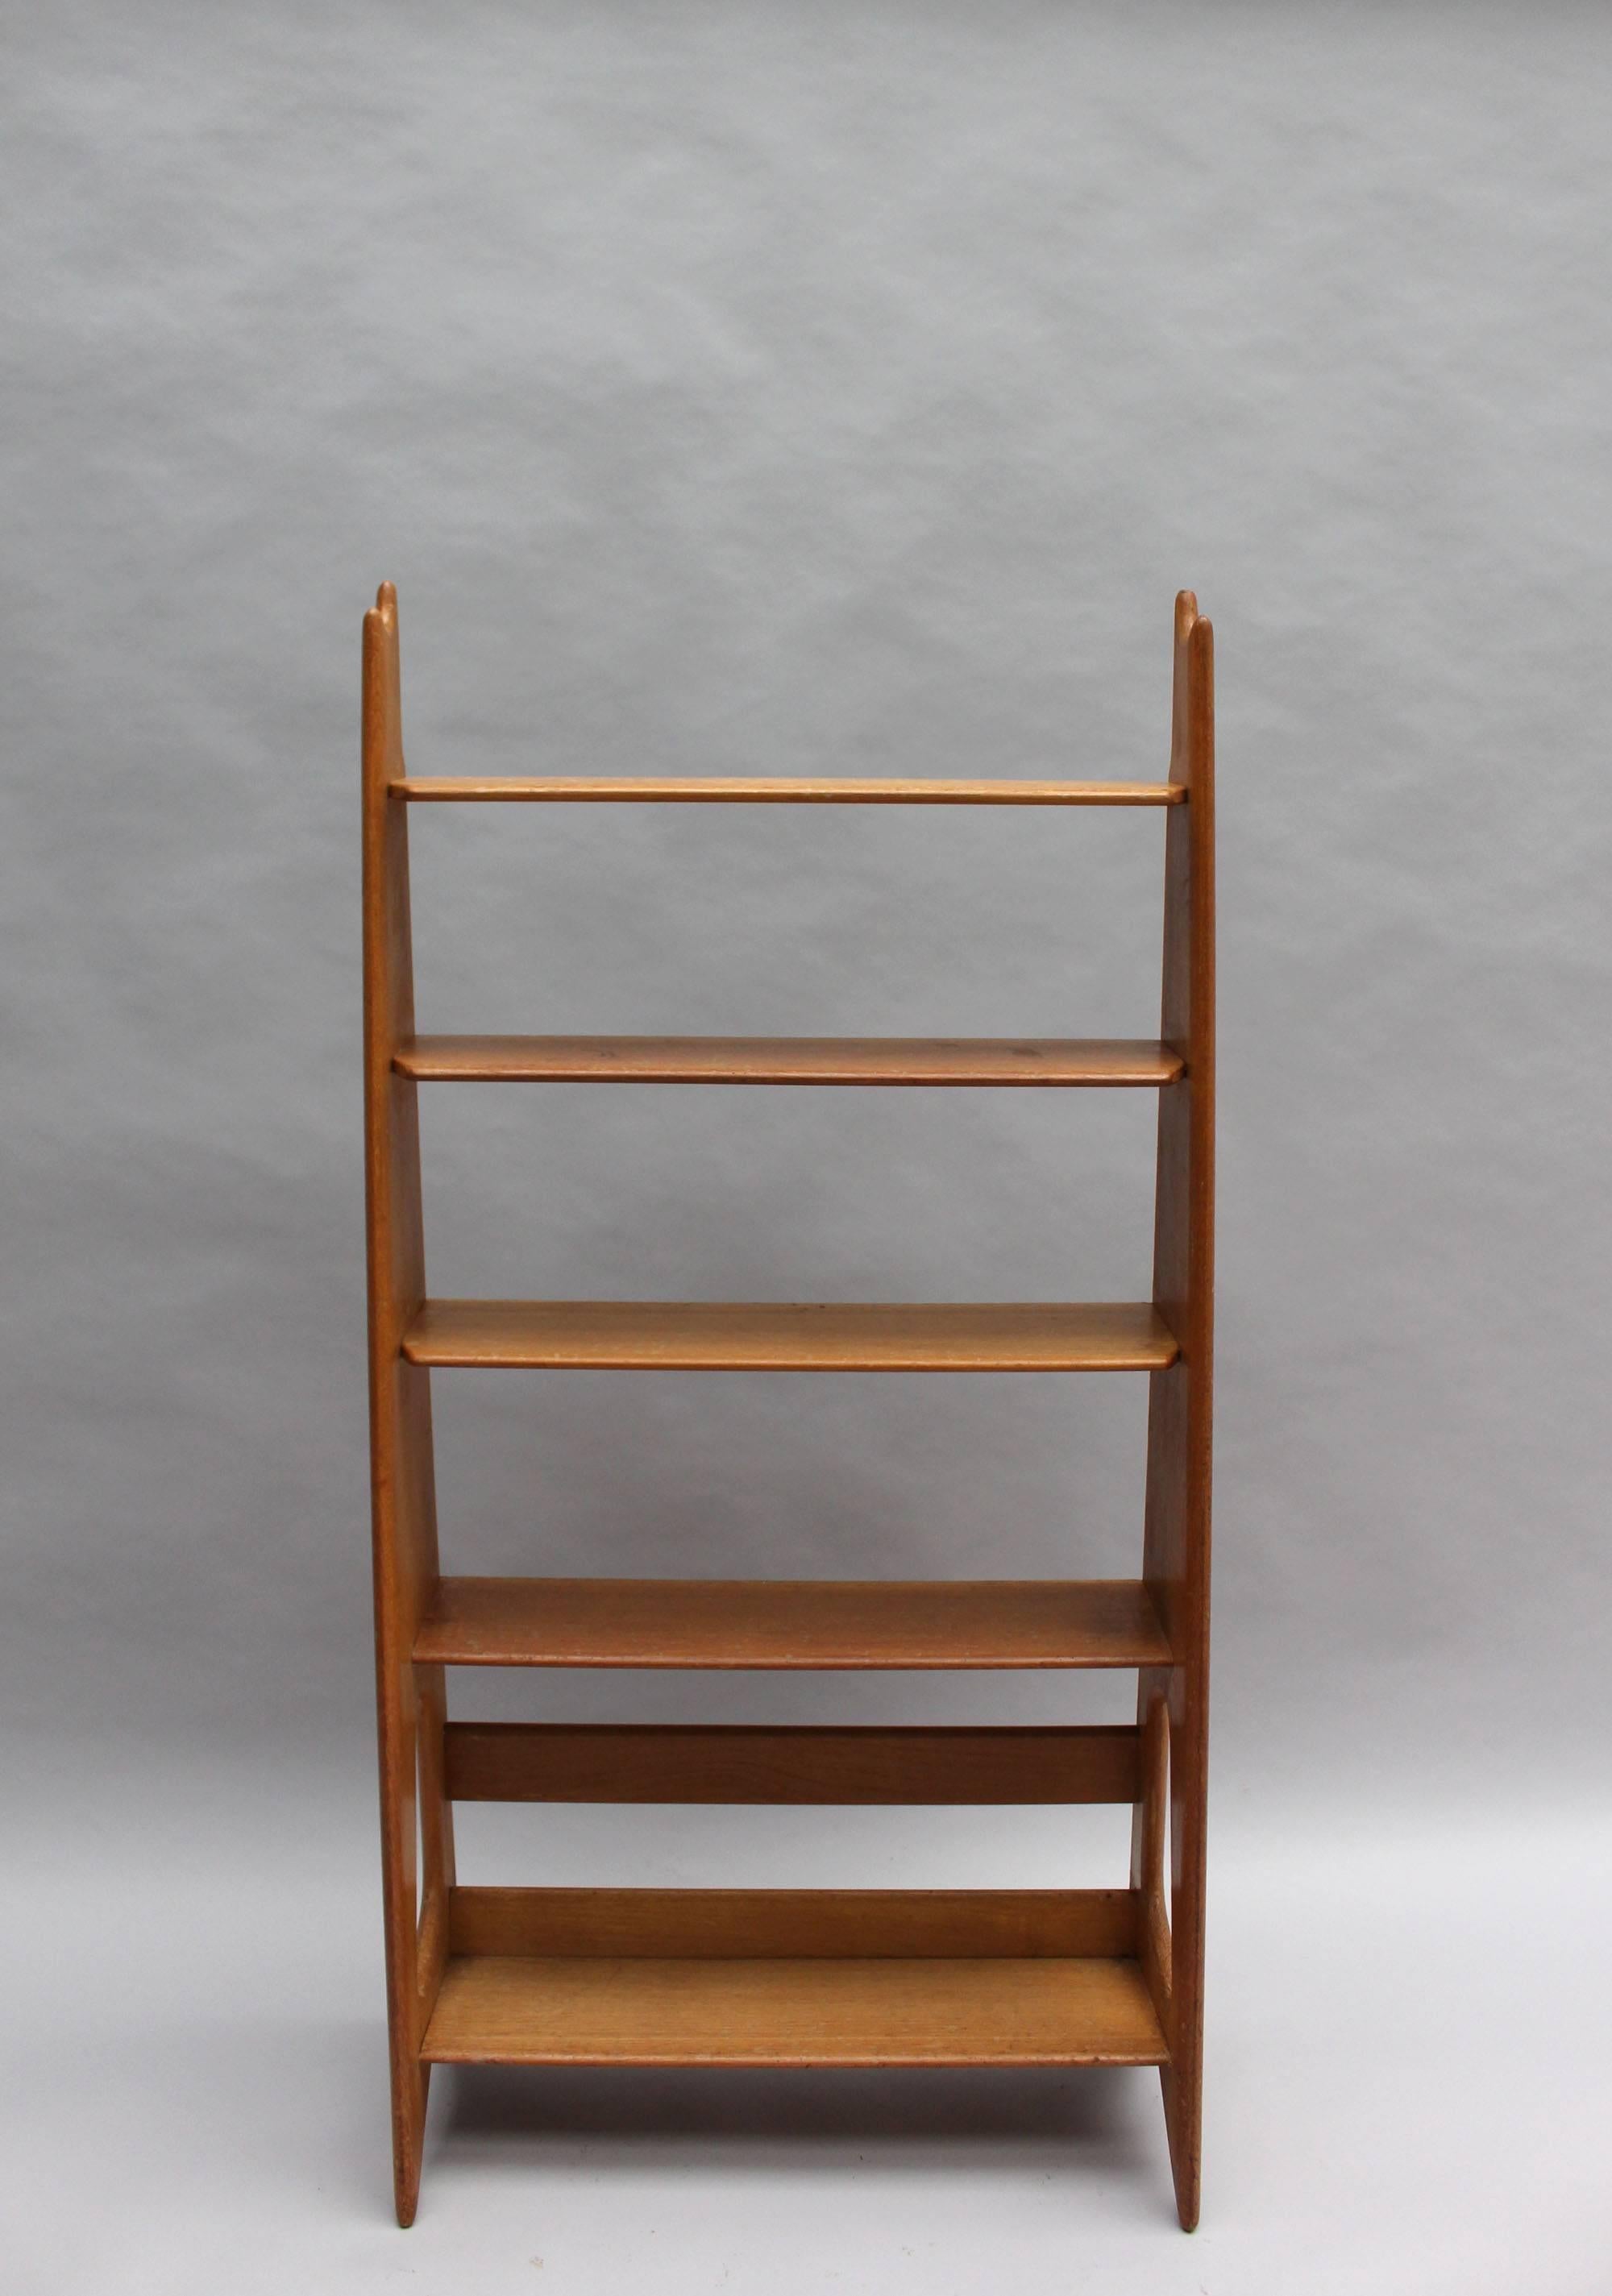 A fine French mid-century solid oak shelves / bookcase by Pierre Cruège (1913-2003), Éditions Formes / France.